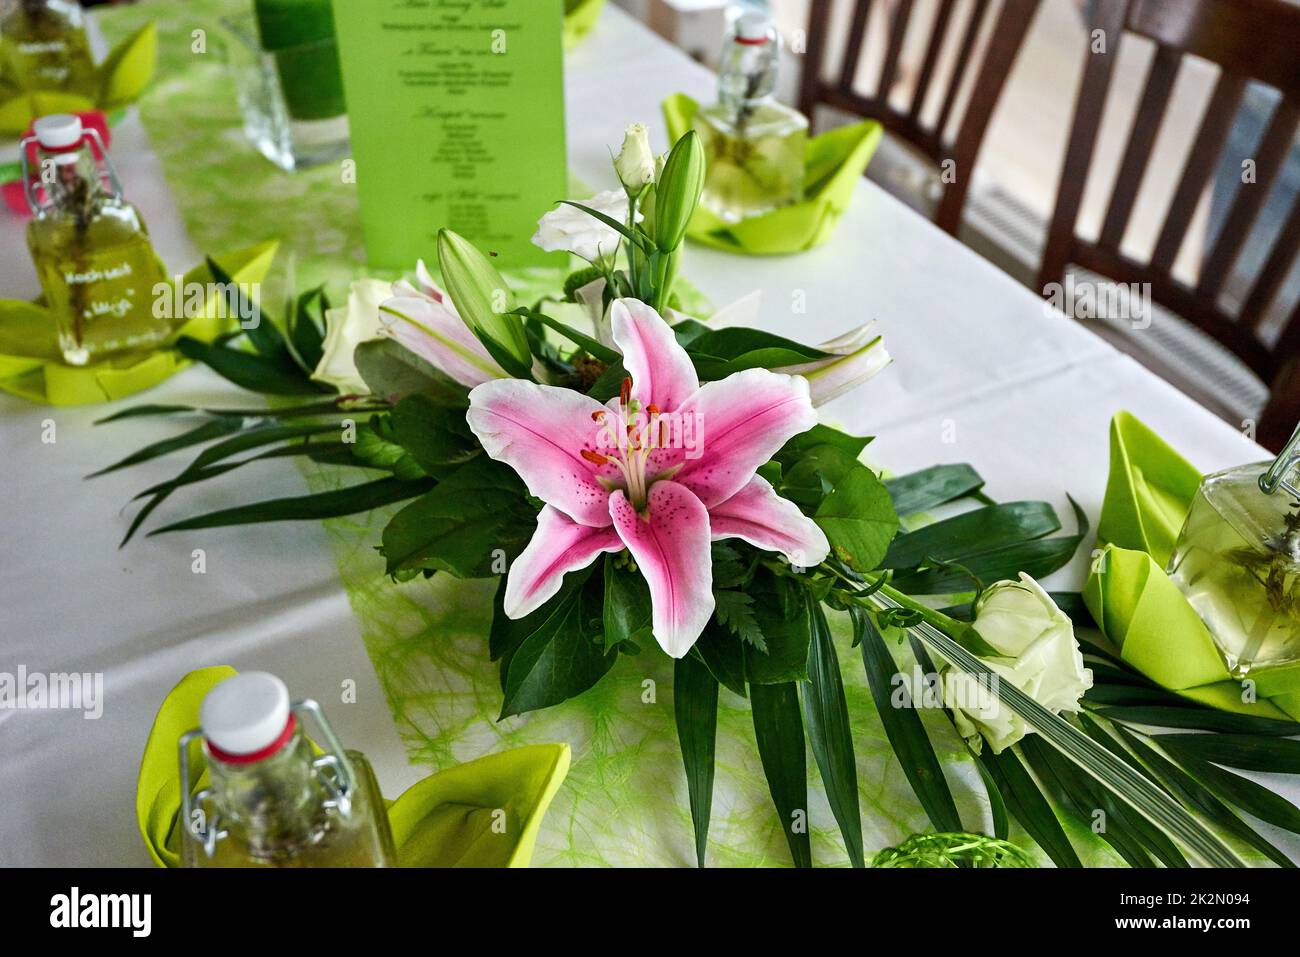 decoration with lilies and green cards for wedding Stock Photo